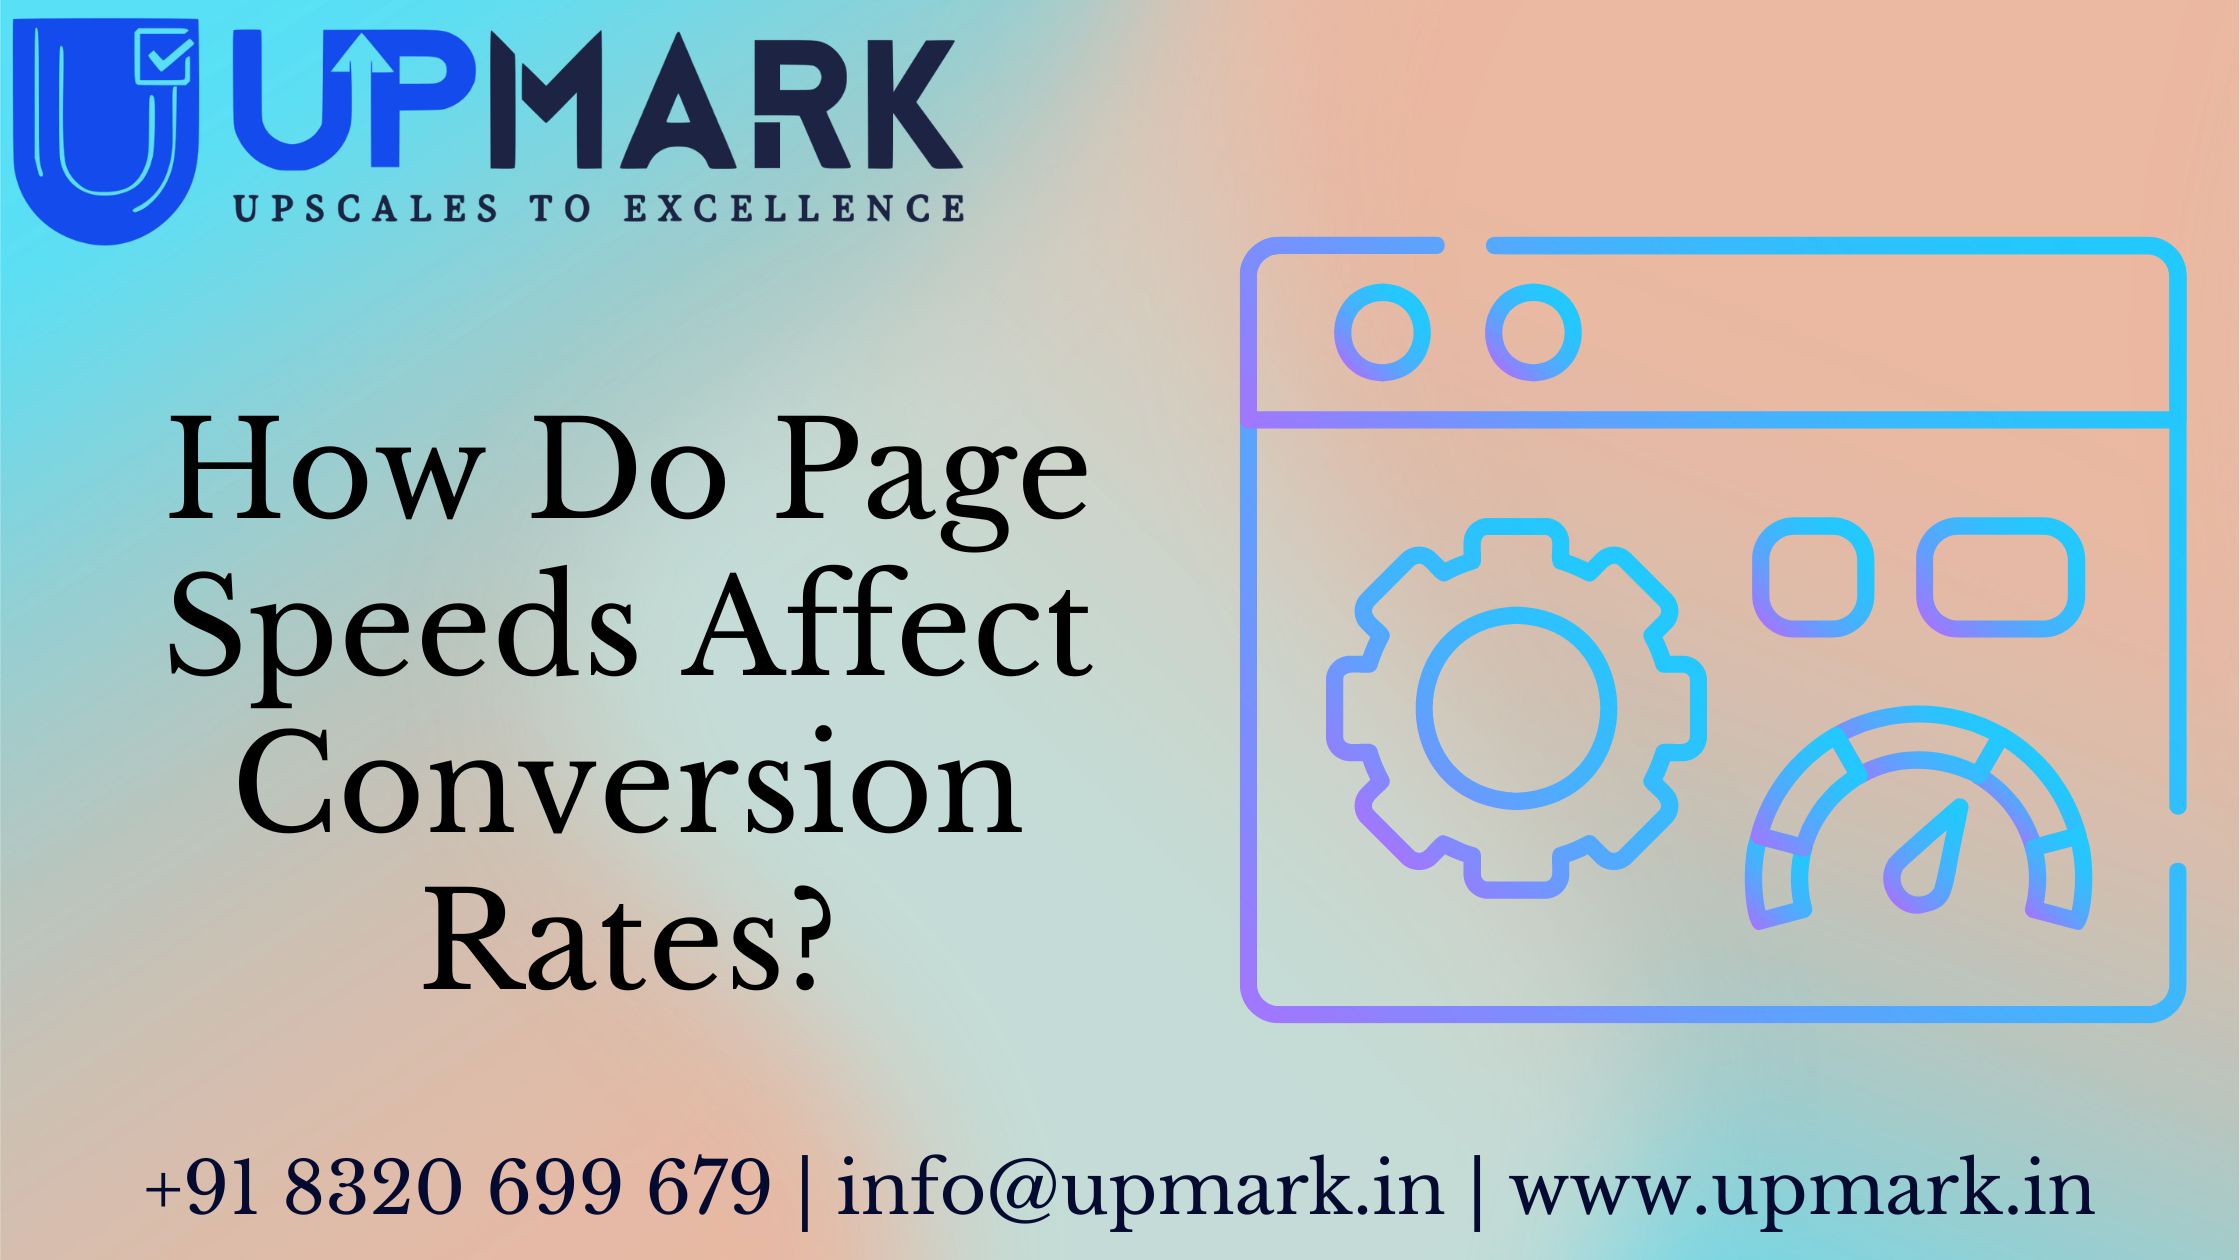 How Do Page Speeds Affect Conversion Rates?